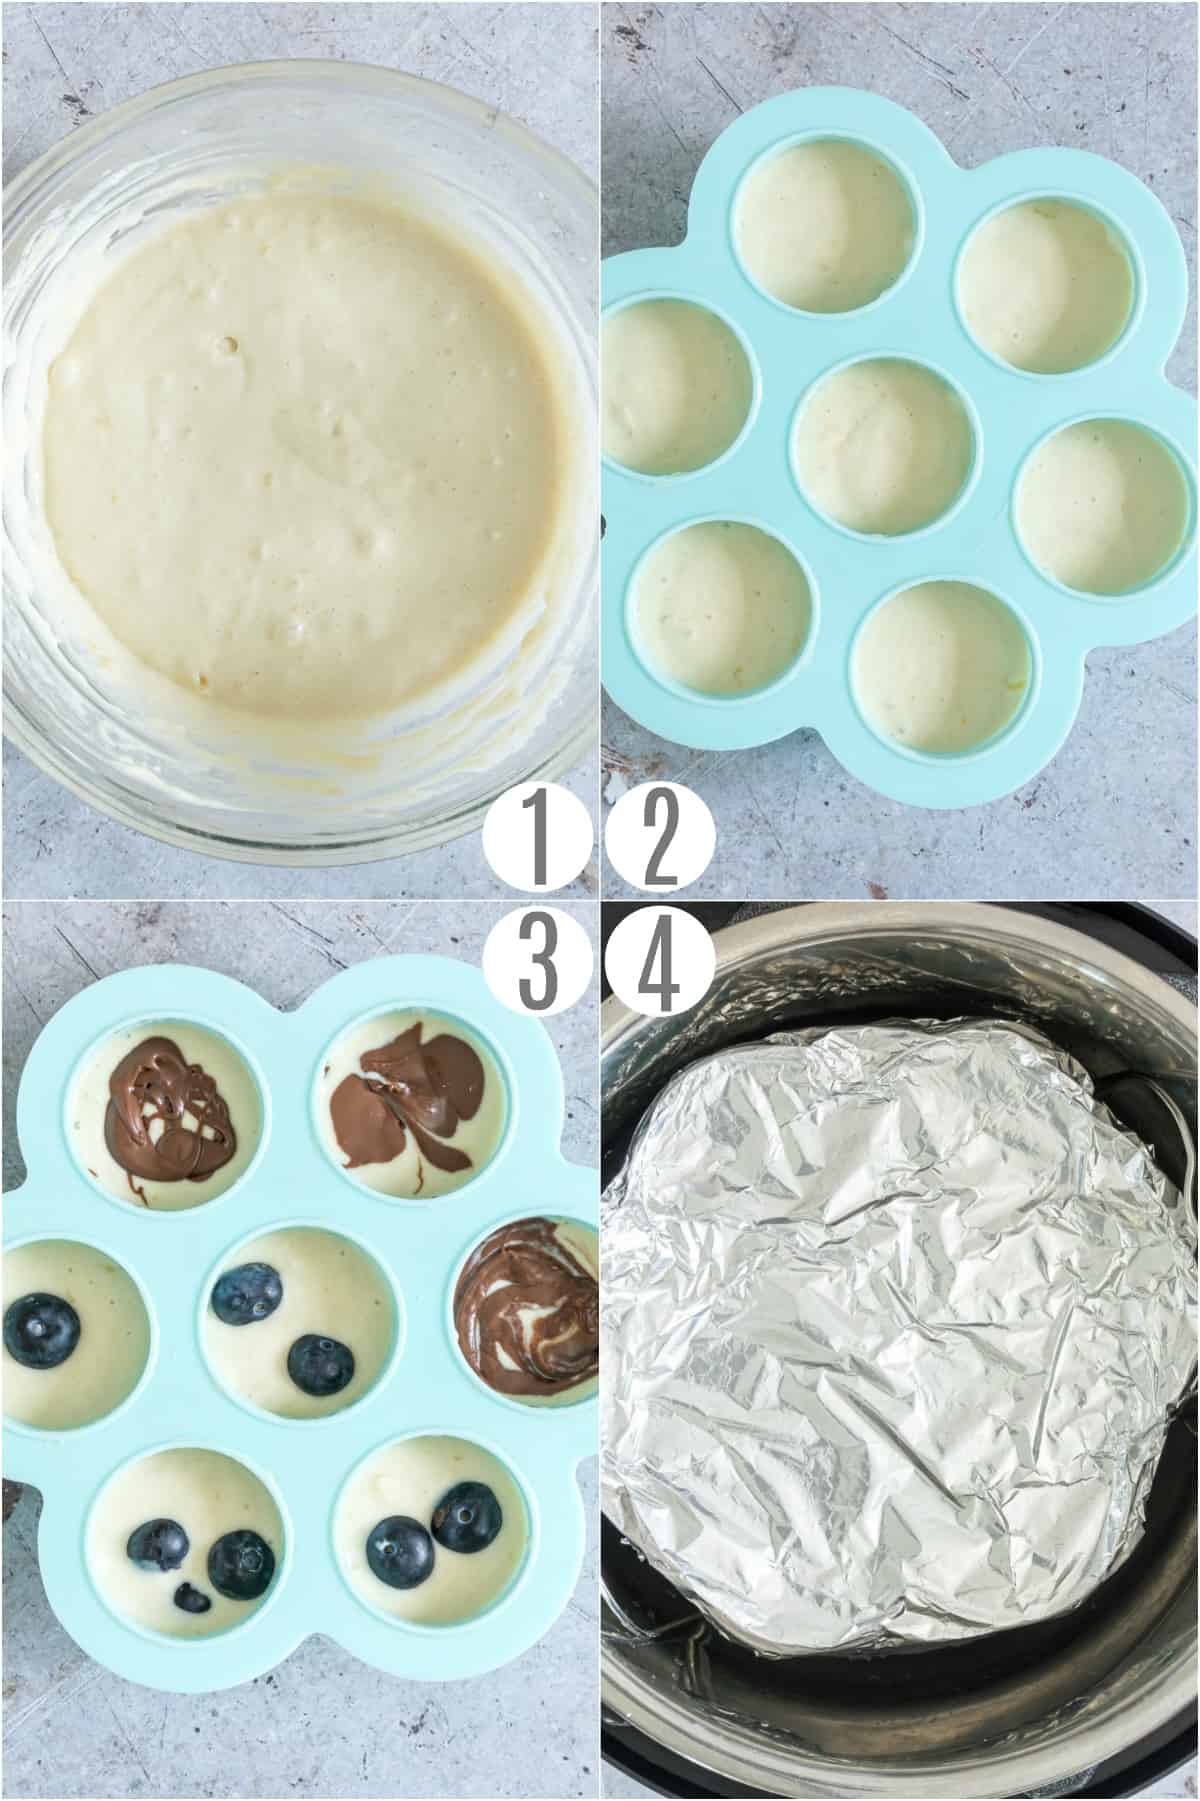 Step by step photos showing how to make pancake bites in the Instant Pot pressure cooker.